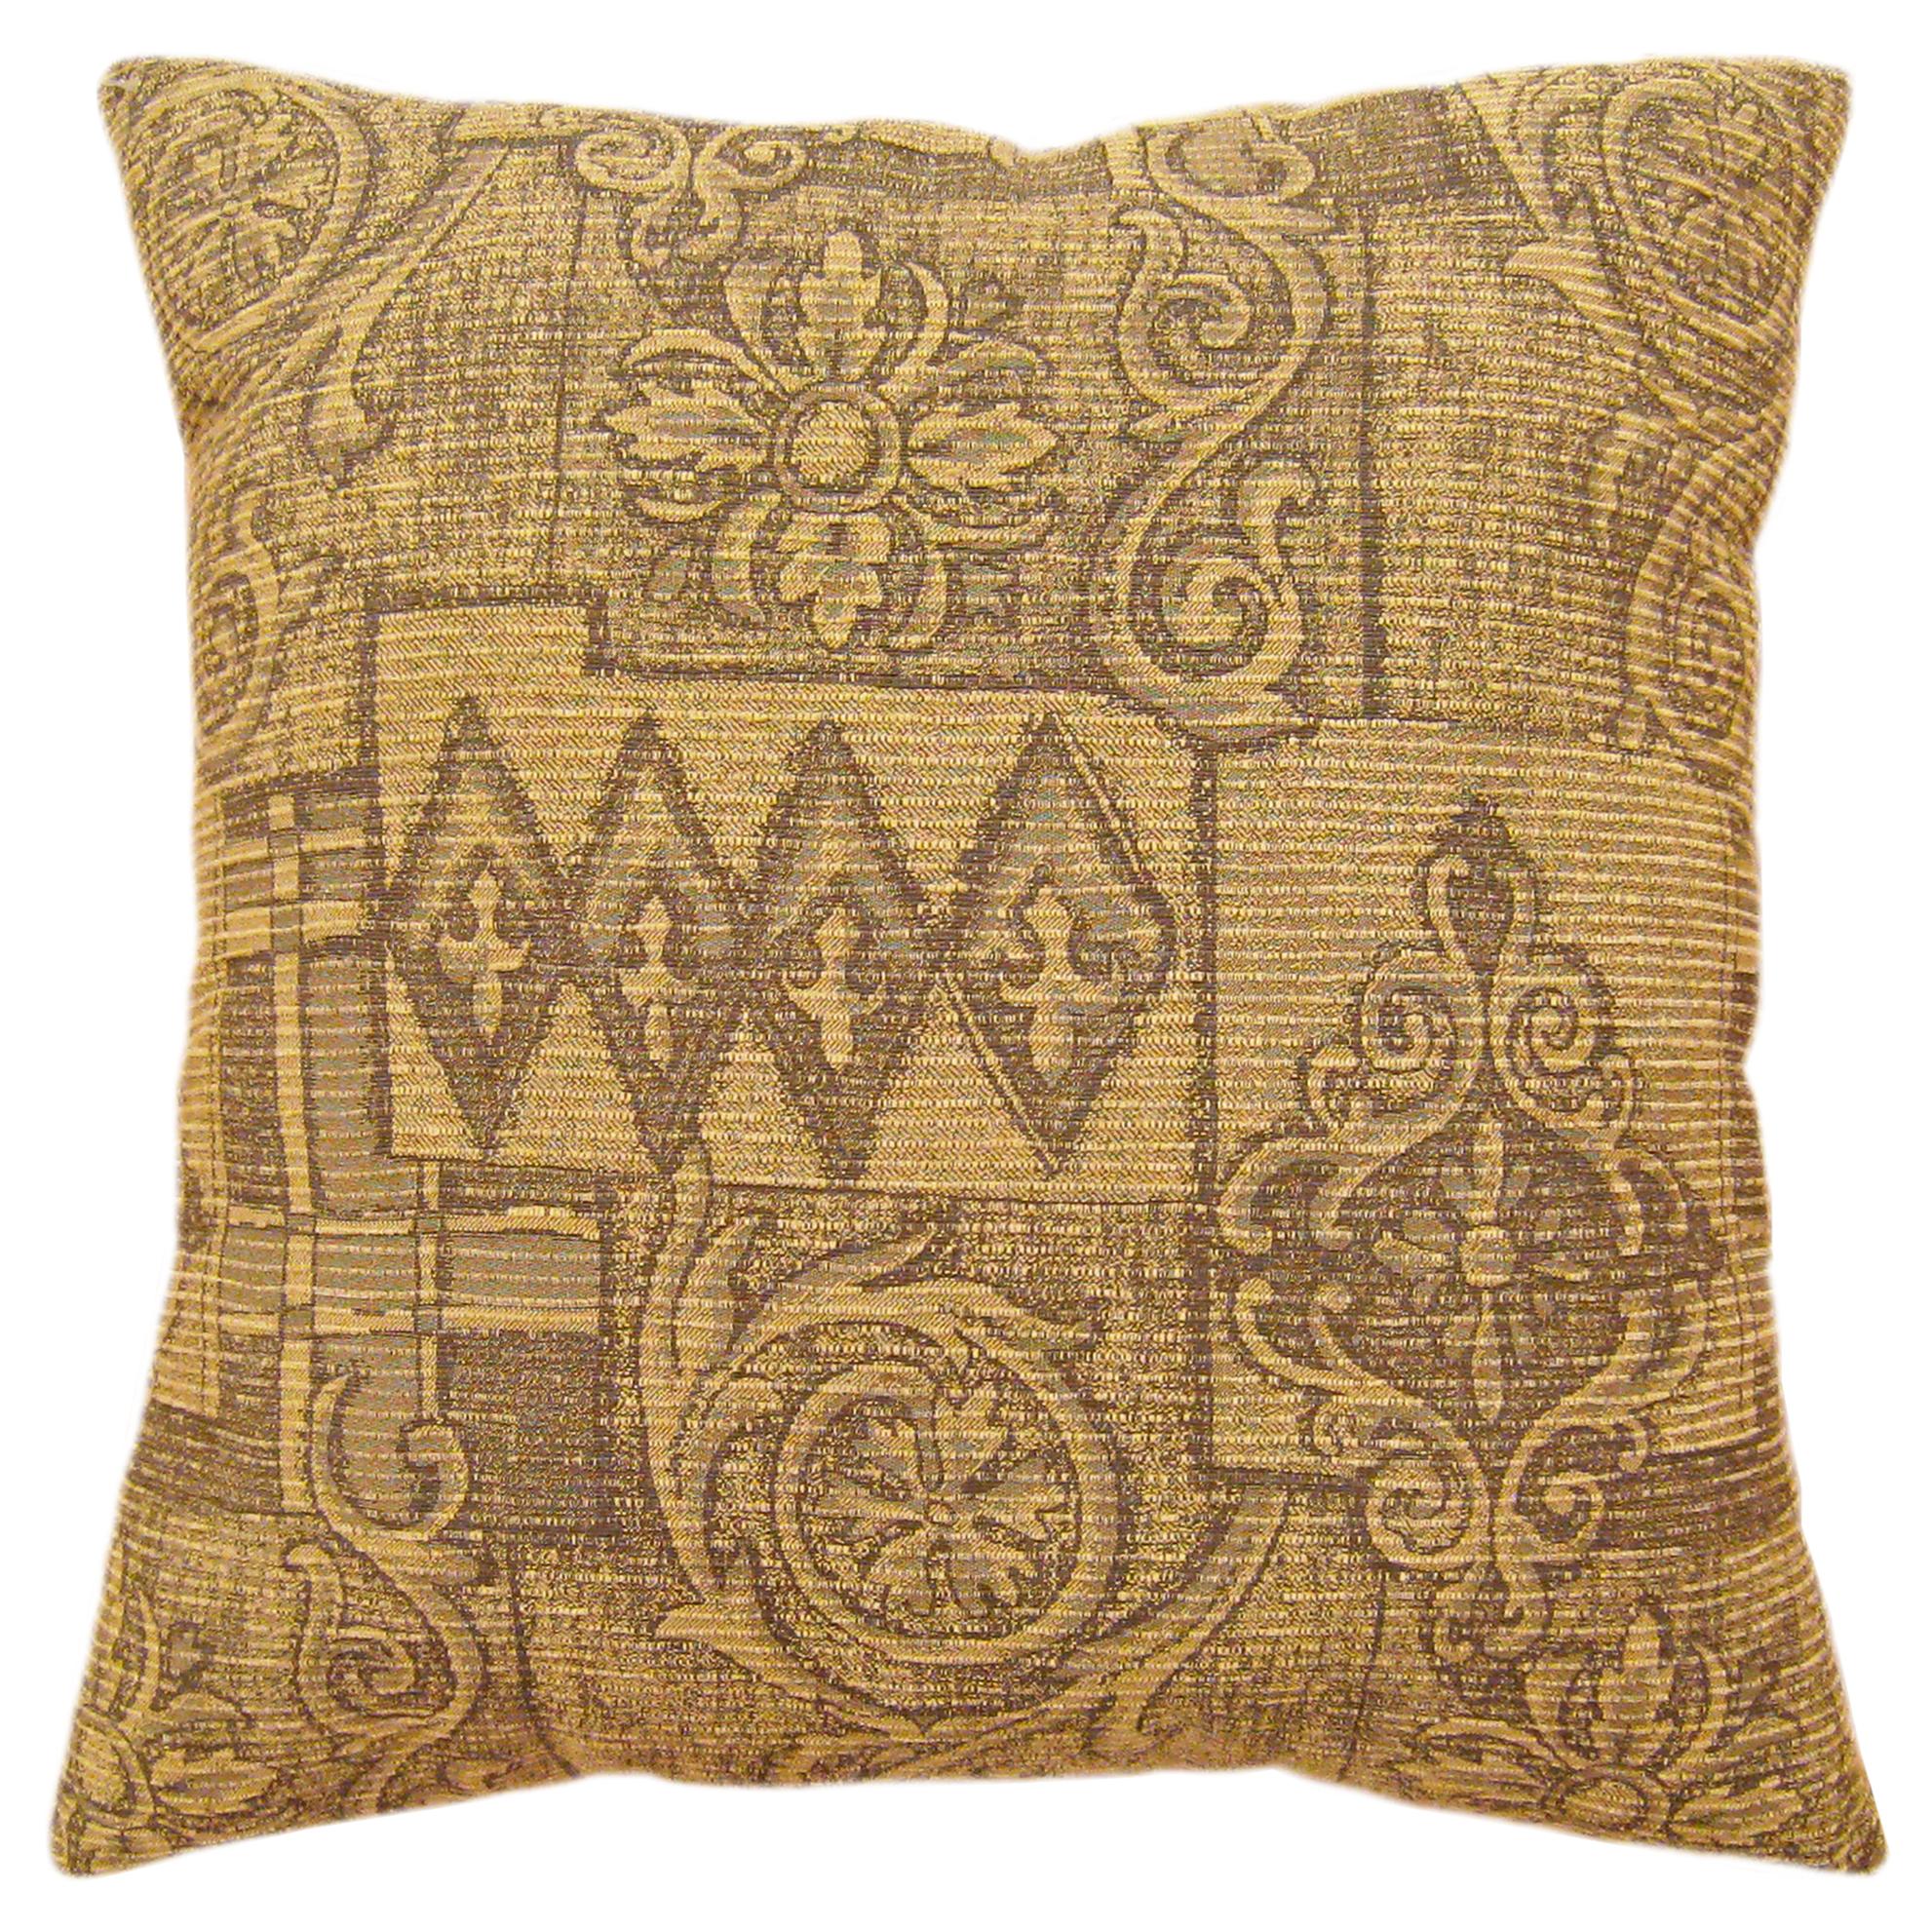 Mid-20th Century Pair of Decorative Vintage Floro-Geometric Fabric Pillows For Sale